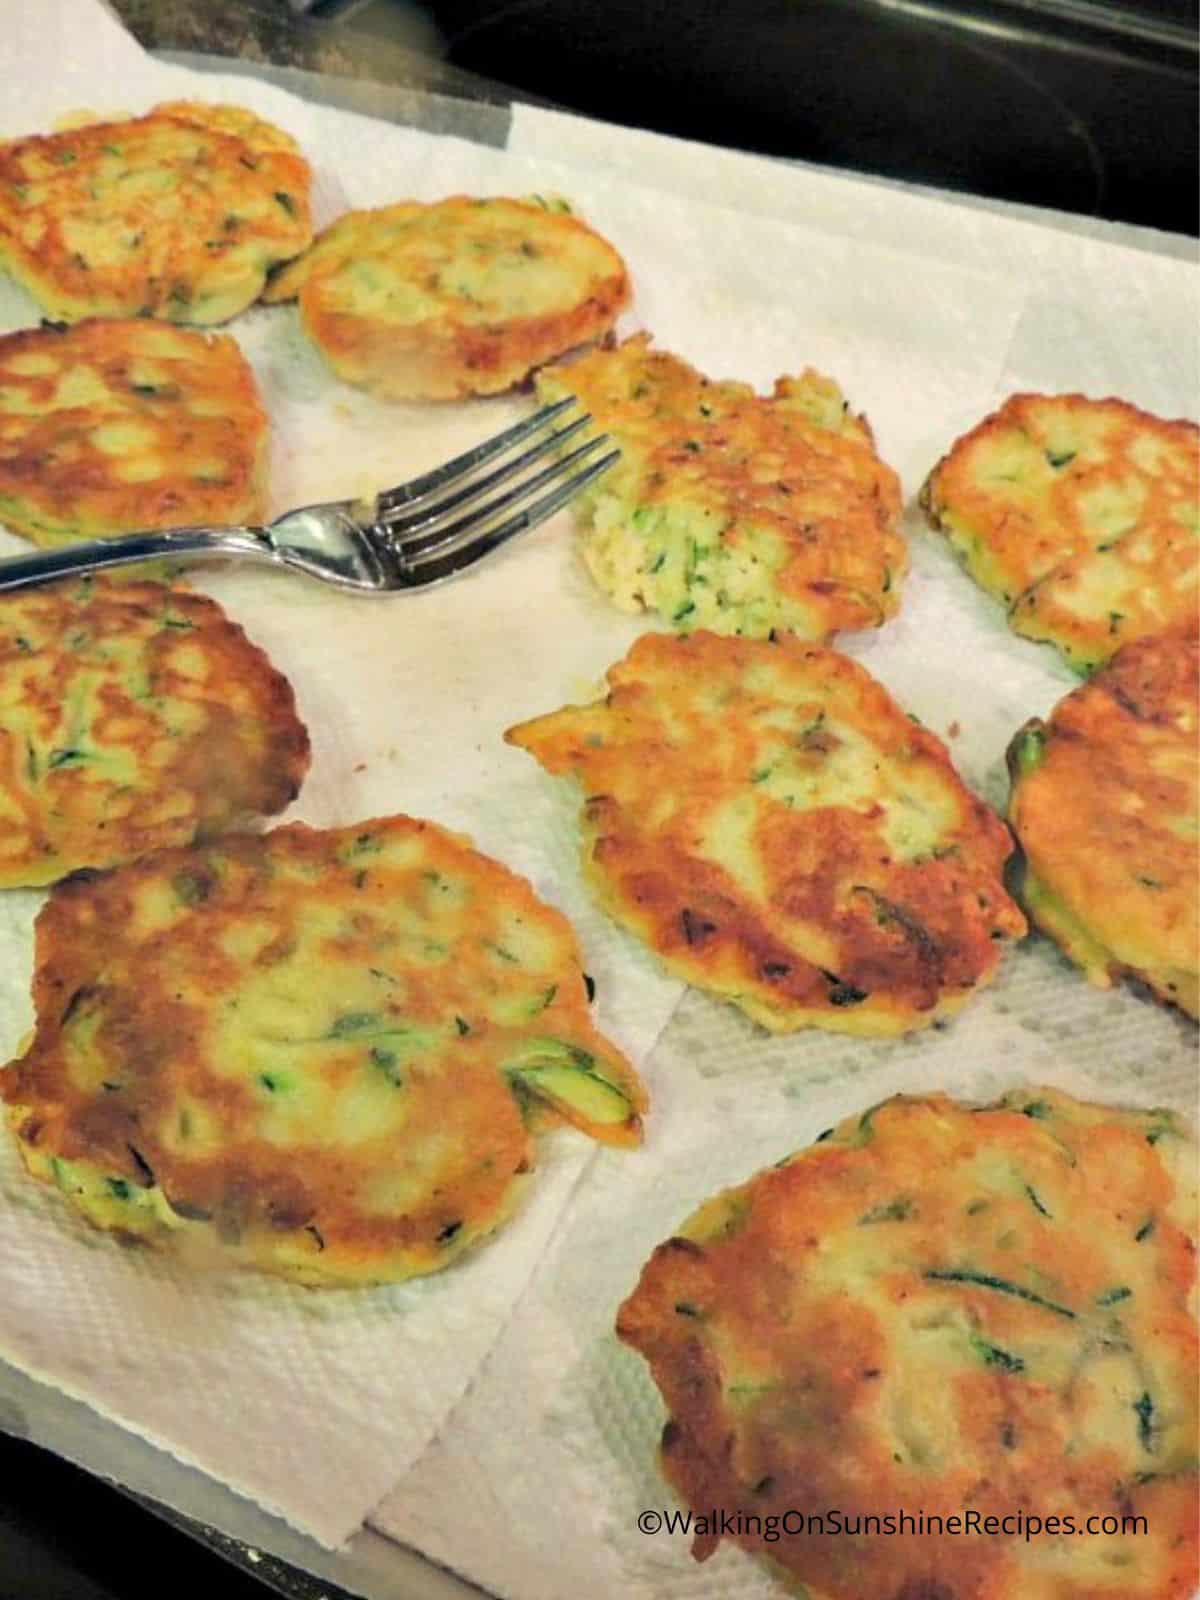 Zucchini fritters on paper towel after frying with fork.